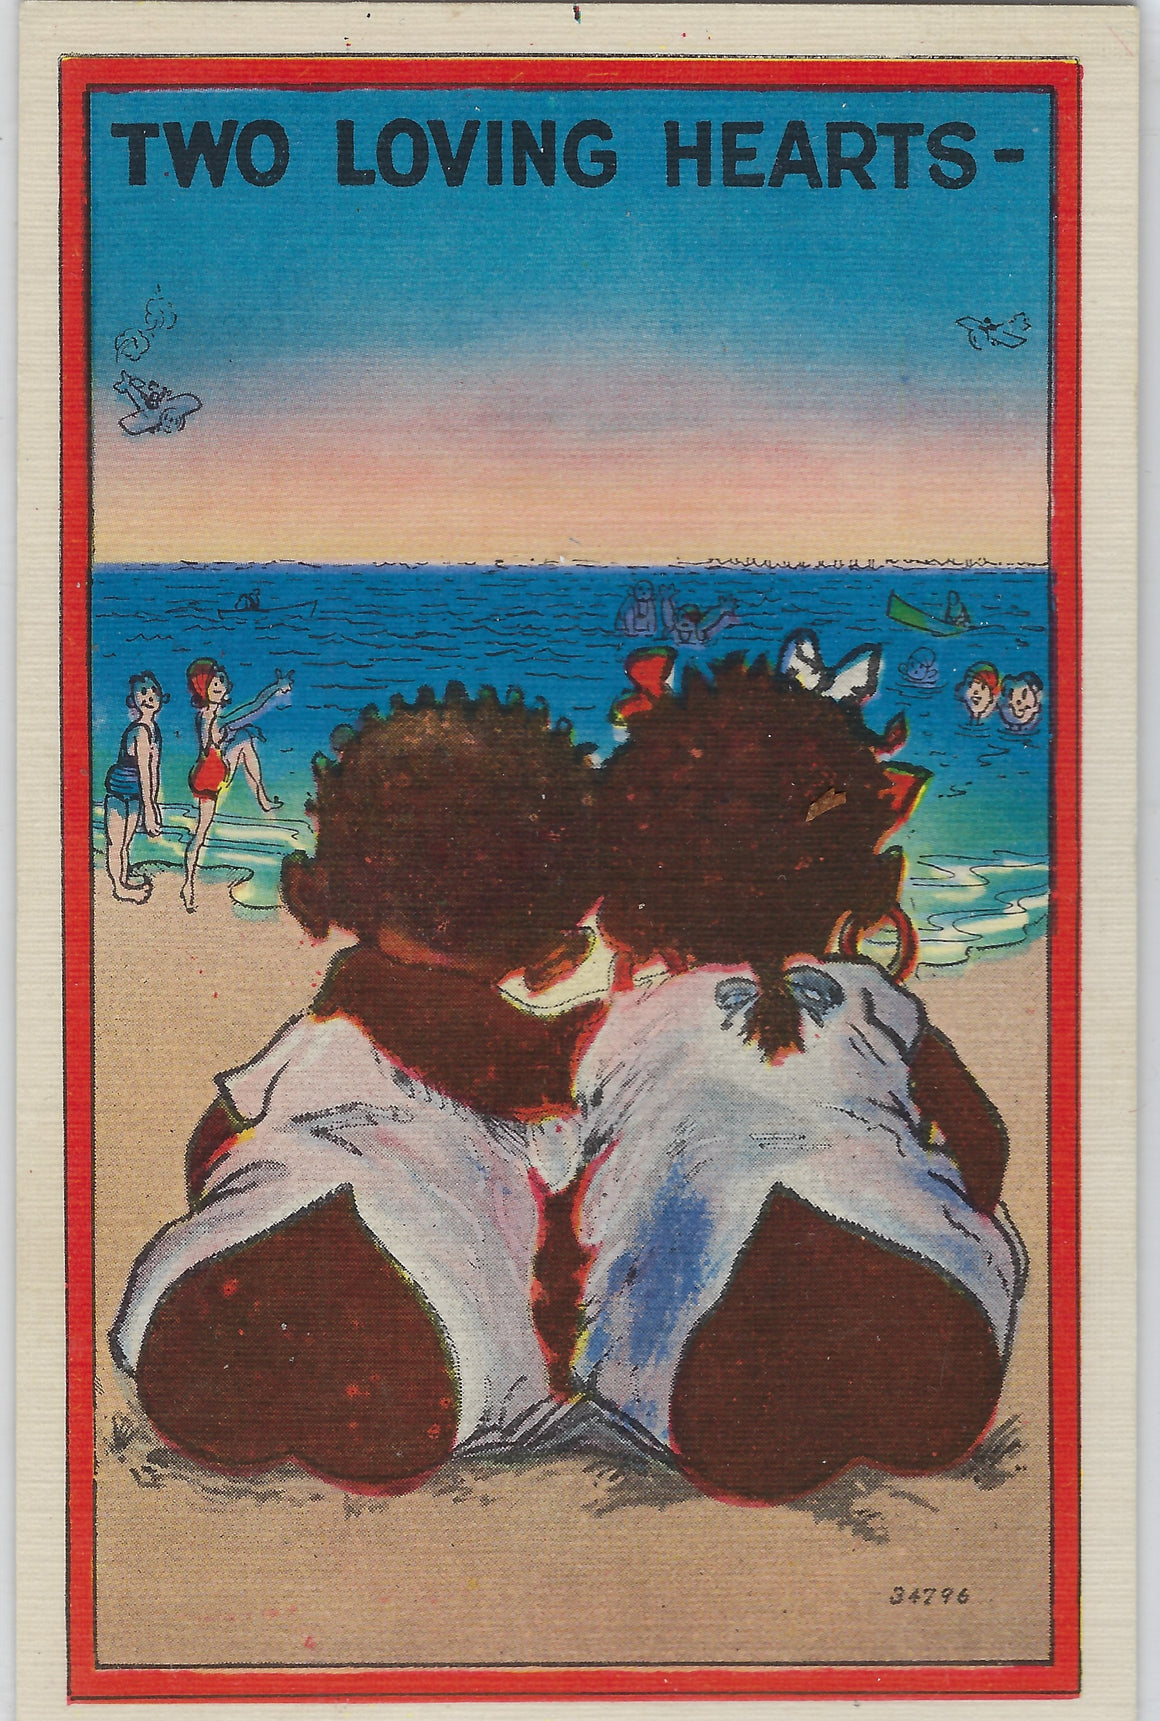 Black Americana Postcard Two Little African American Children with Heart Shaped Bums on Beach